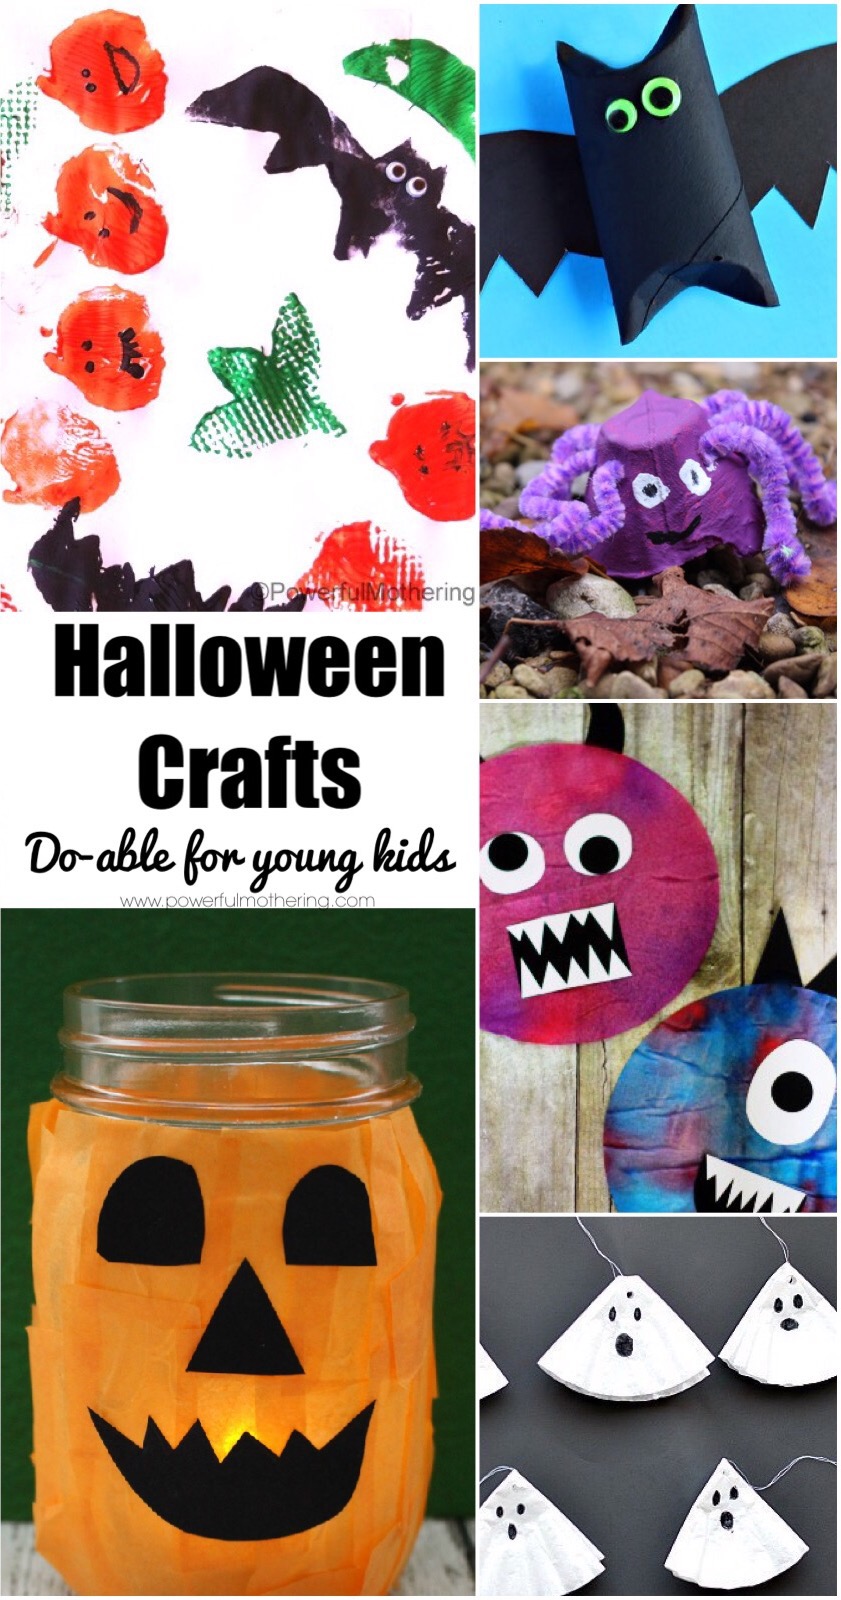 40+ Do-able Halloween Crafts for Toddlers and Preschoolers